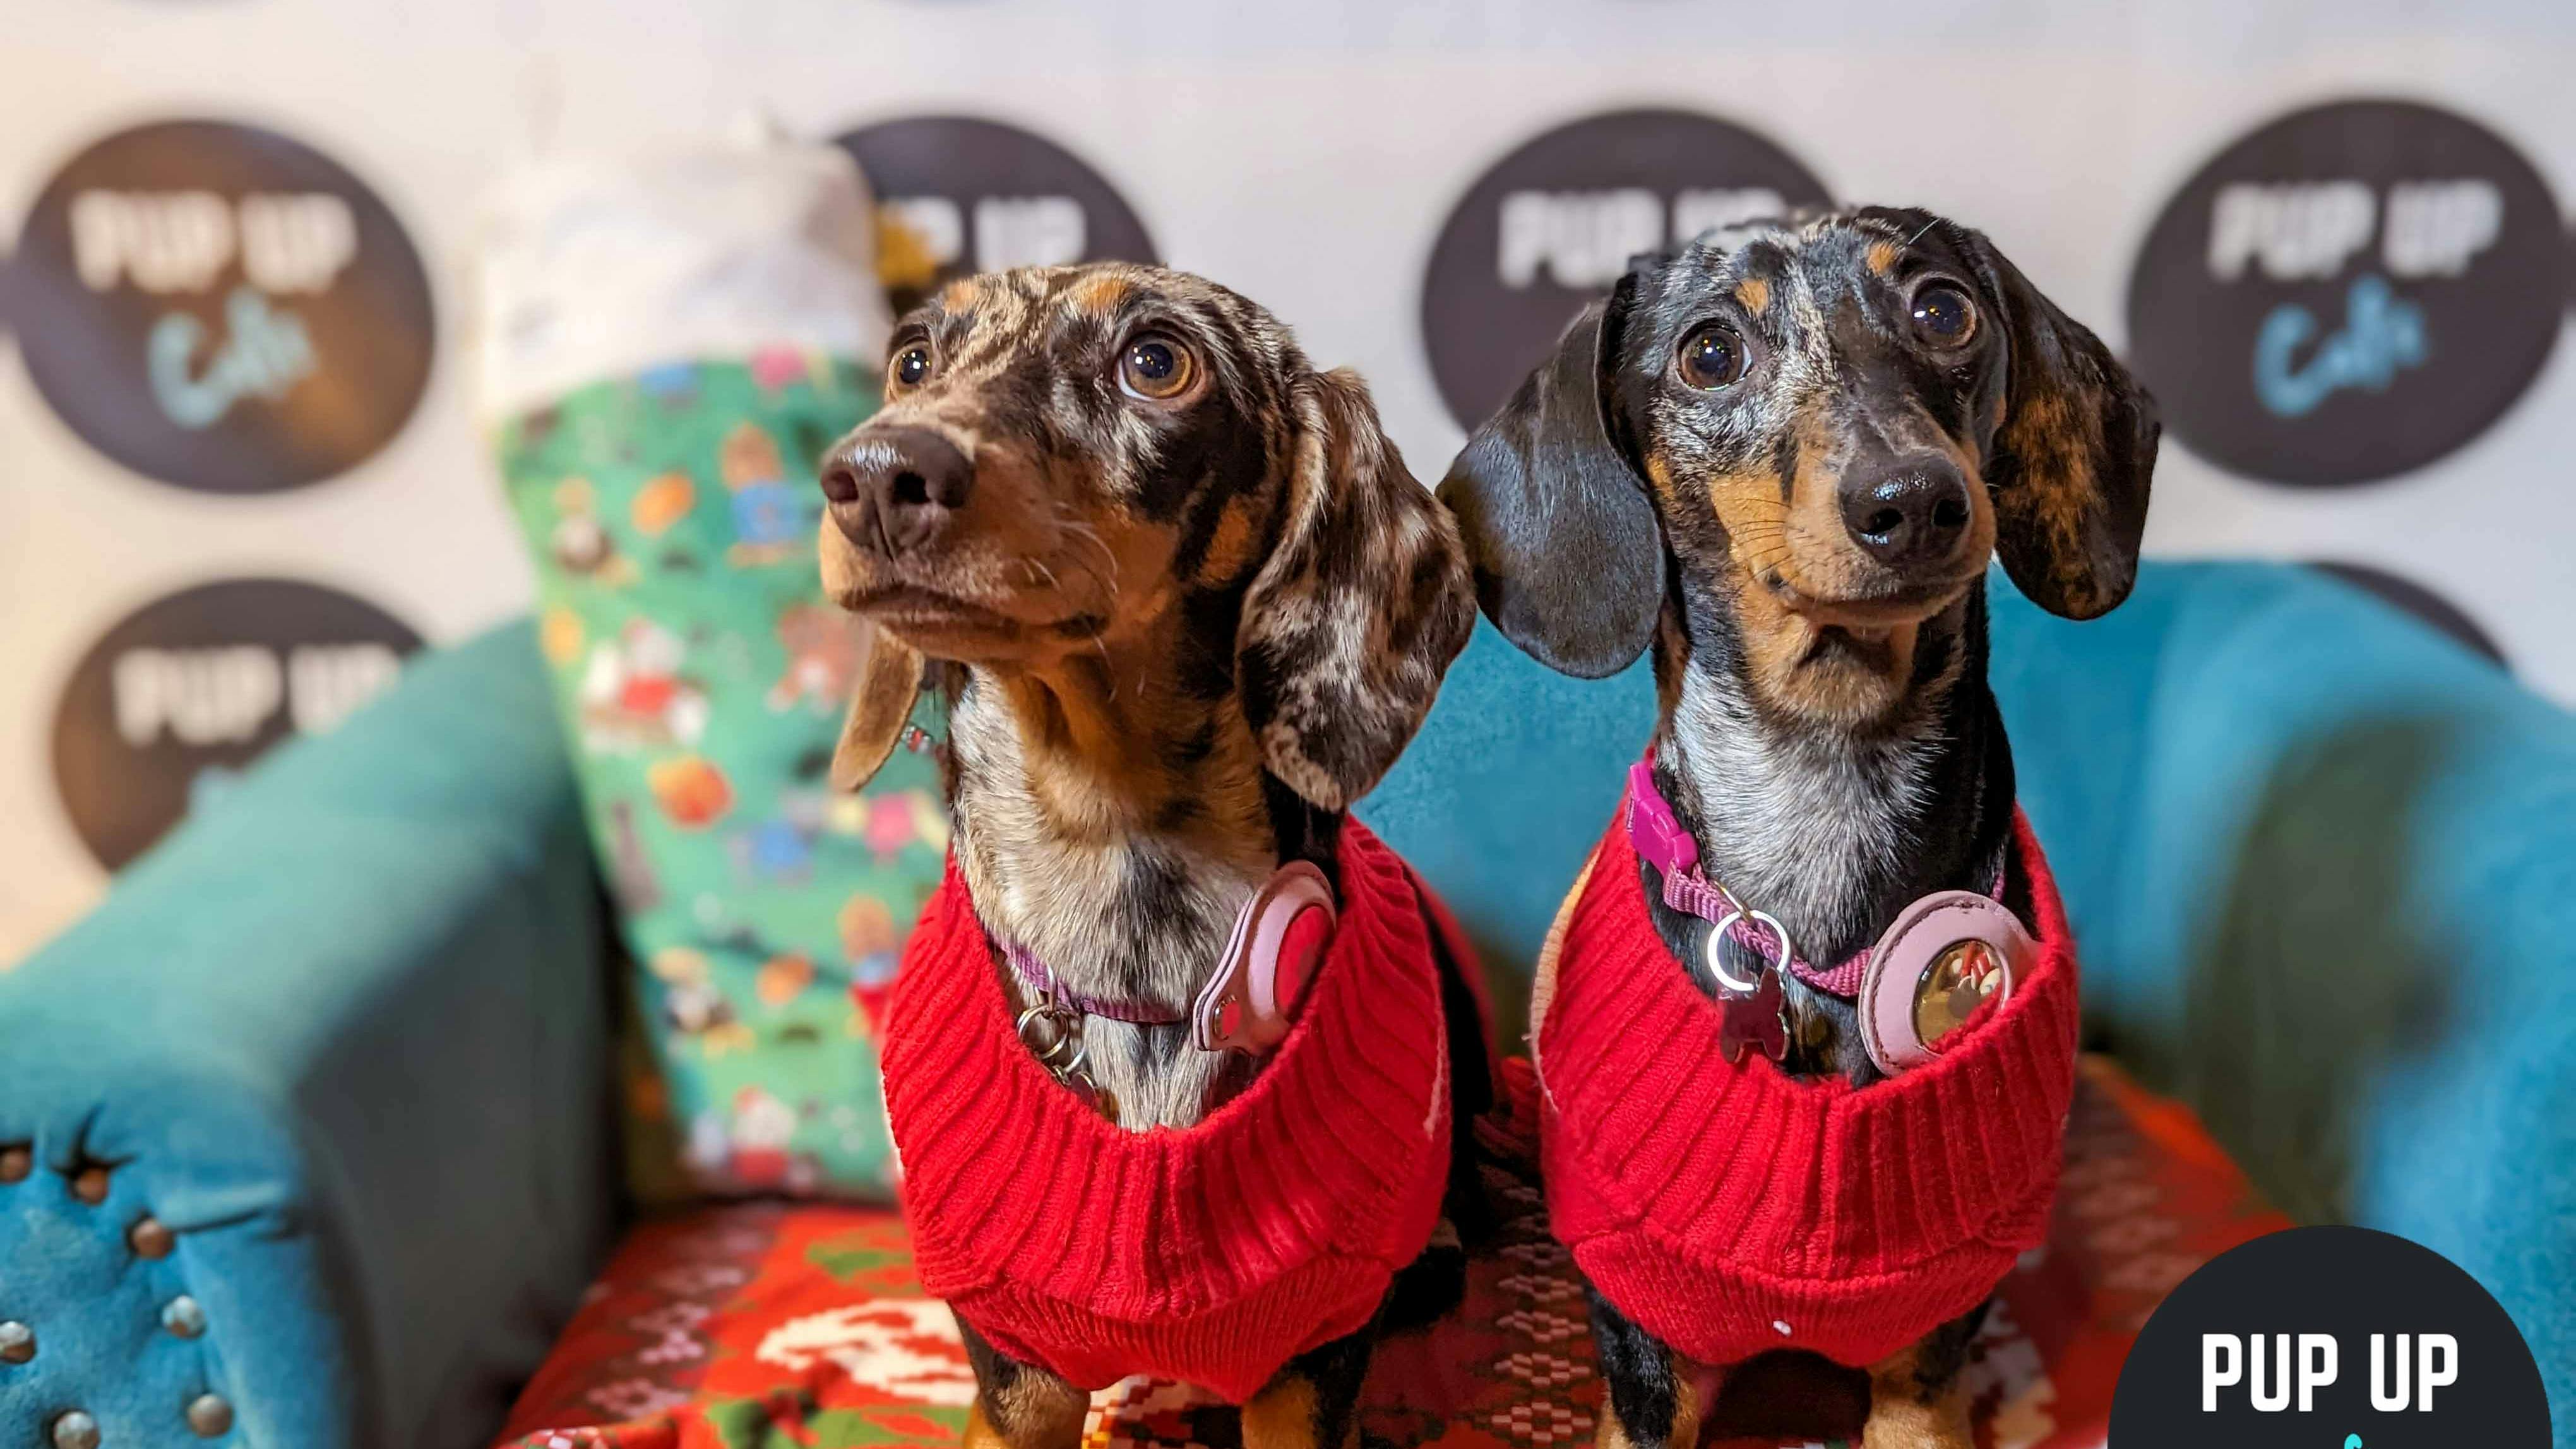 Sausages get festive at the Dashing Dachshund Christmas Tour in Leeds